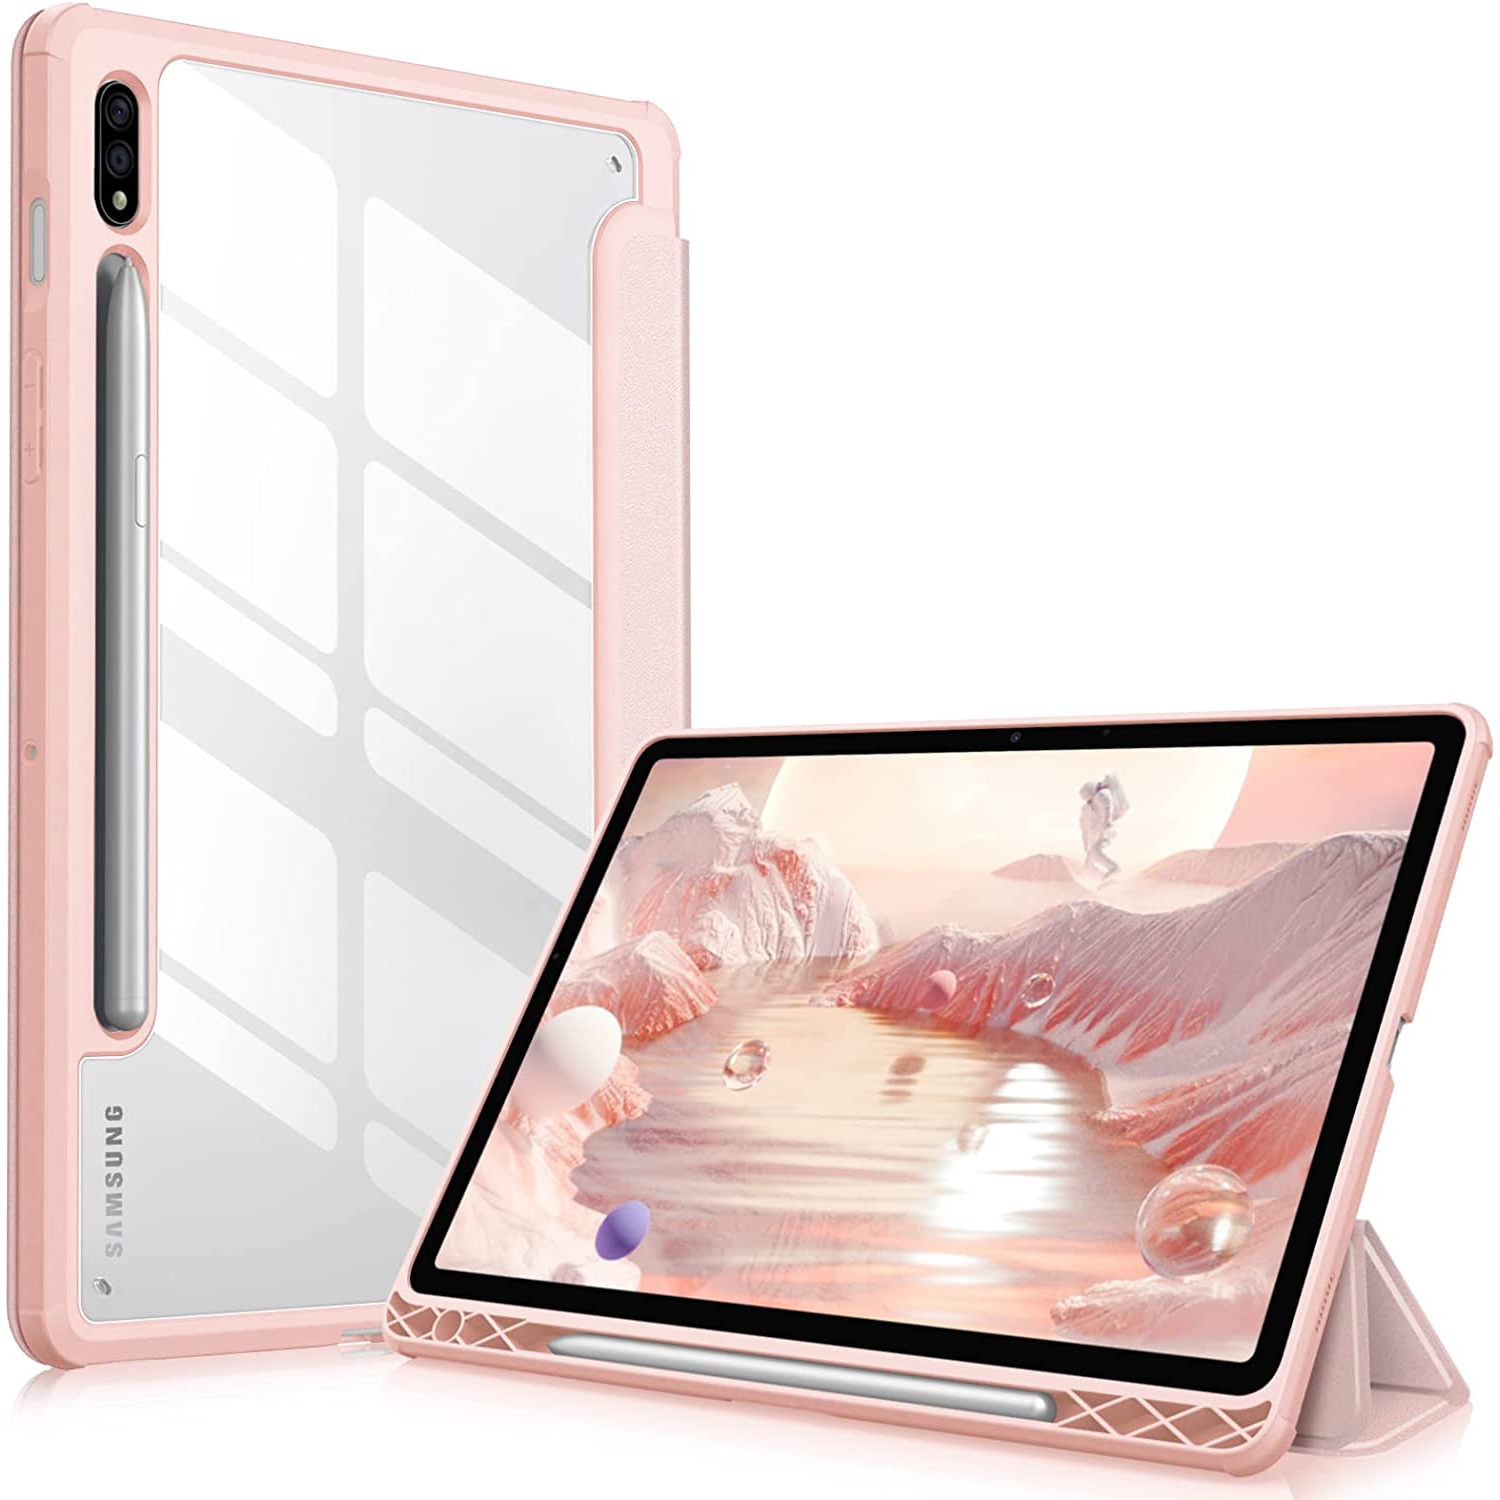 F Hybrid Slim Case for Samsung Galaxy Tab S8/Tab S7 11 inch (Model SM-X700/X706/T870/T875/T878) with S Pen Holder, Shockproof Cover with Clear Transparent Back Shell, Auto Wake/Sle